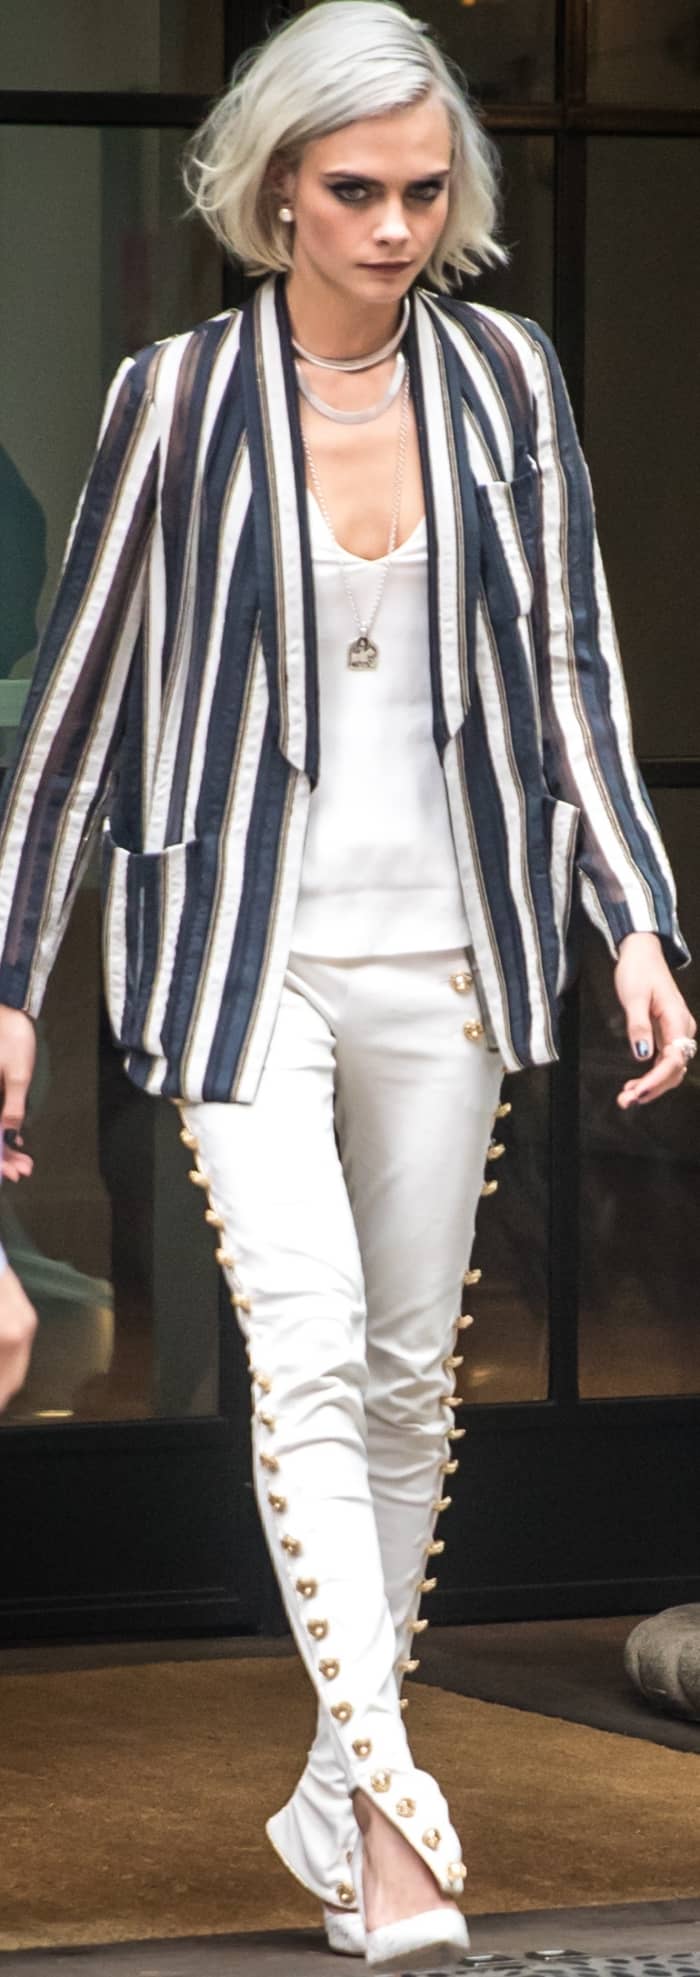 Cara Delevingne wearing a Brunello Cucinelli blazer, J Brand tank, Redemption skinny jeans, and Olgana Paris pumps in NYC